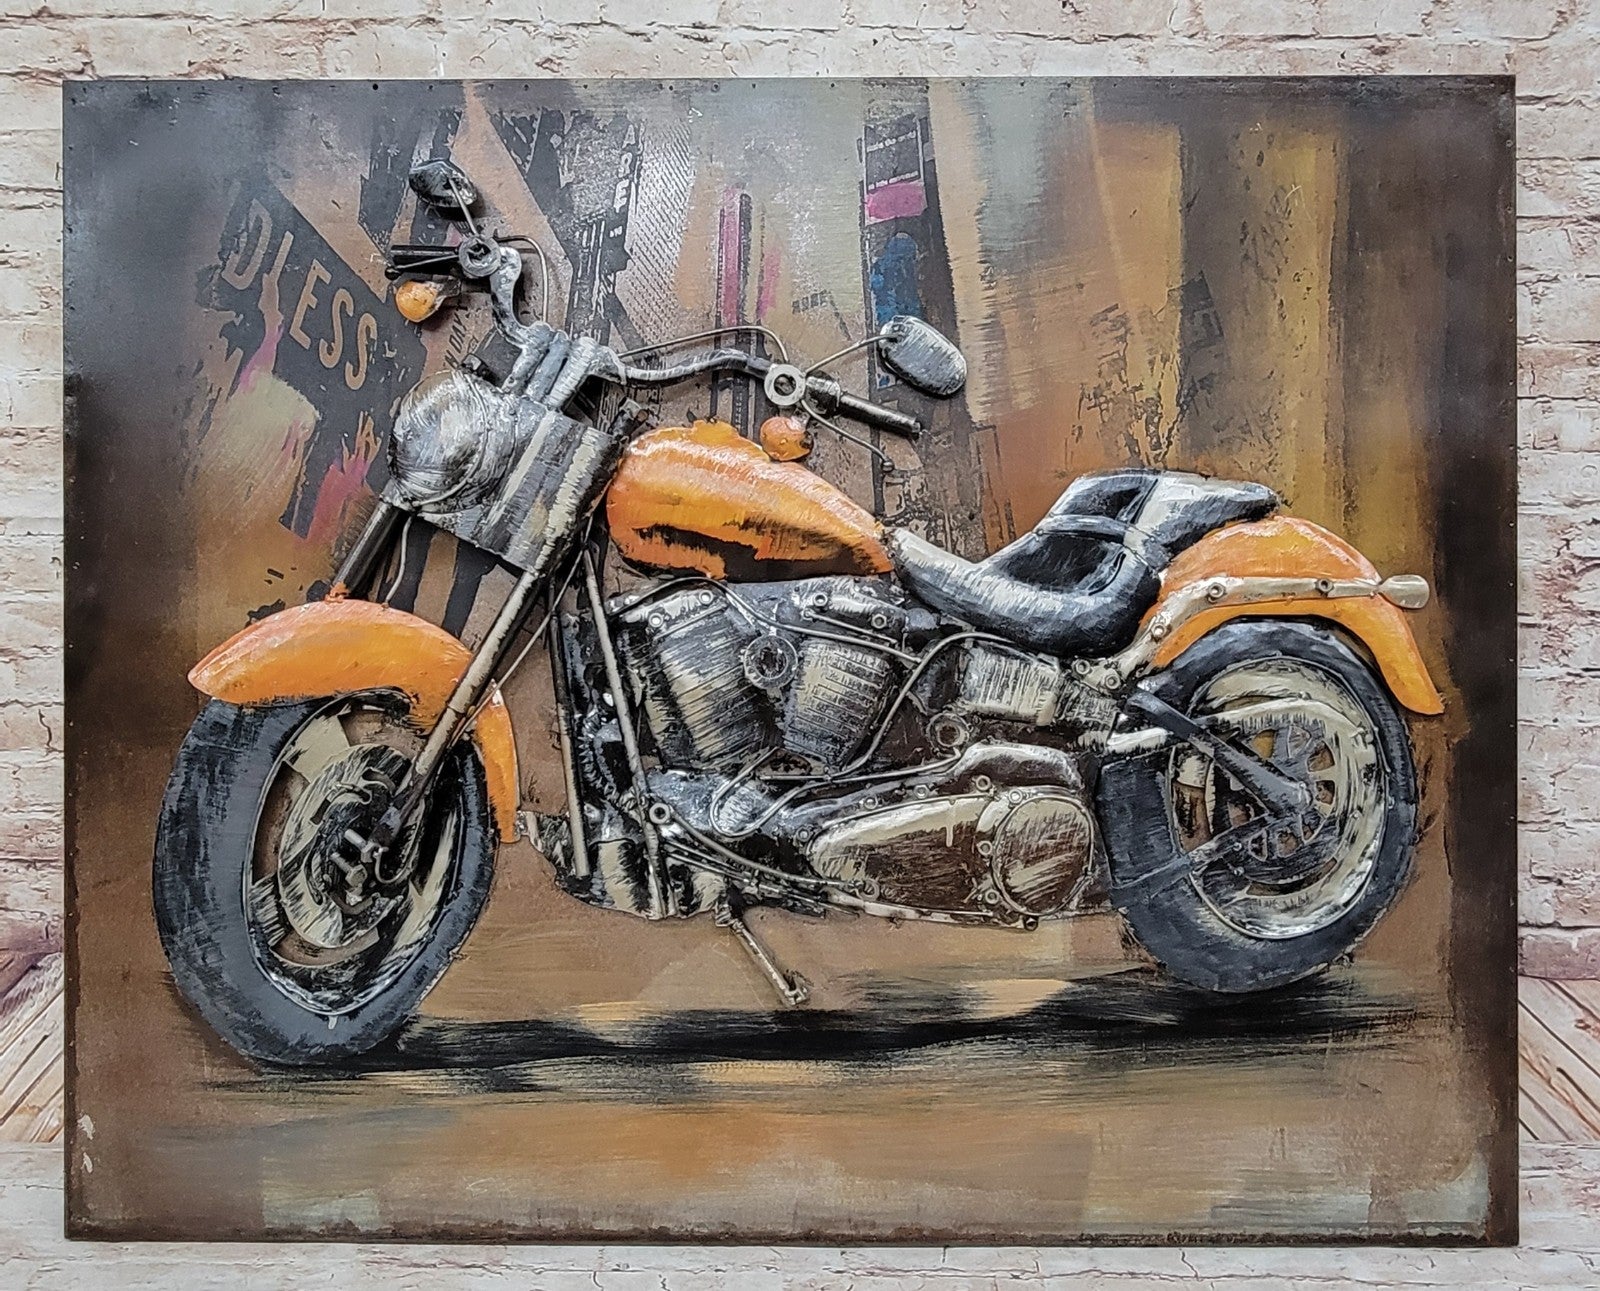 Home and garden decor custom Artwork painting 3d metal motorcycle wall Sculpture